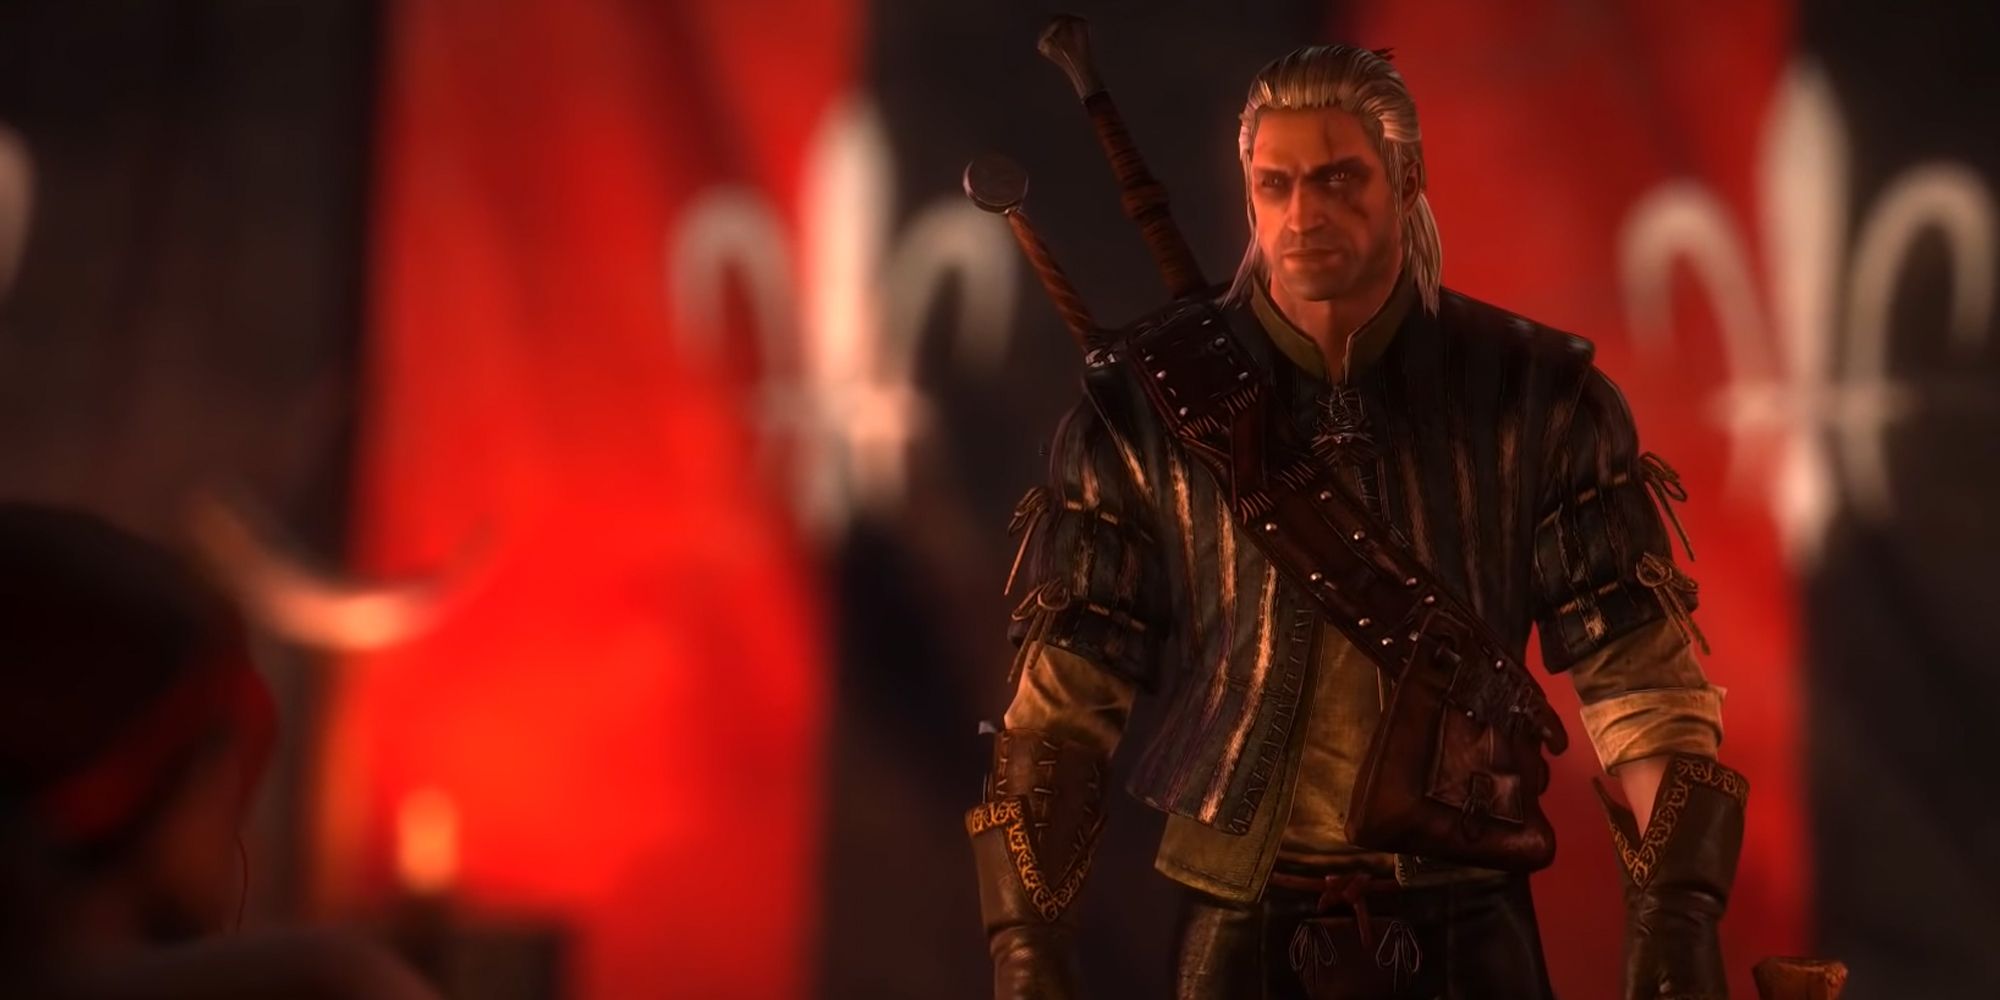 The Witcher 2 Geralt talking to Triss in the opening.